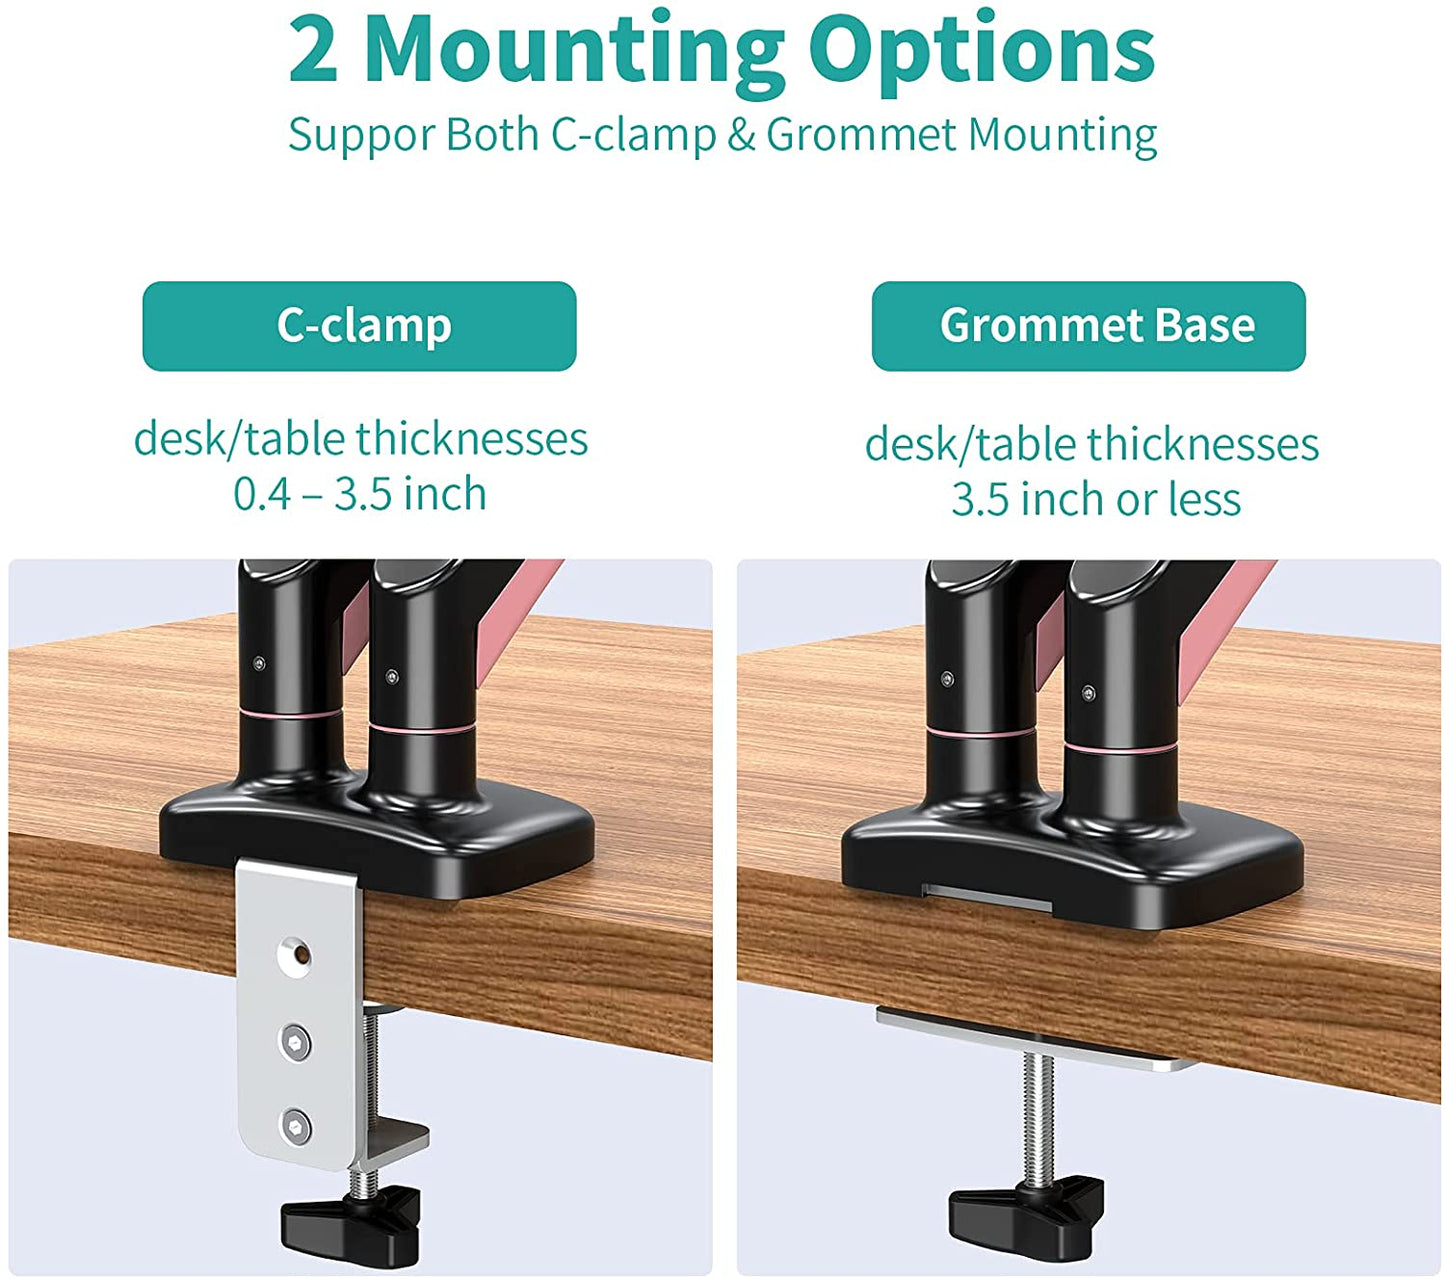 Dual Arms pink monitor desk holder for c-clamp and grommet mounting